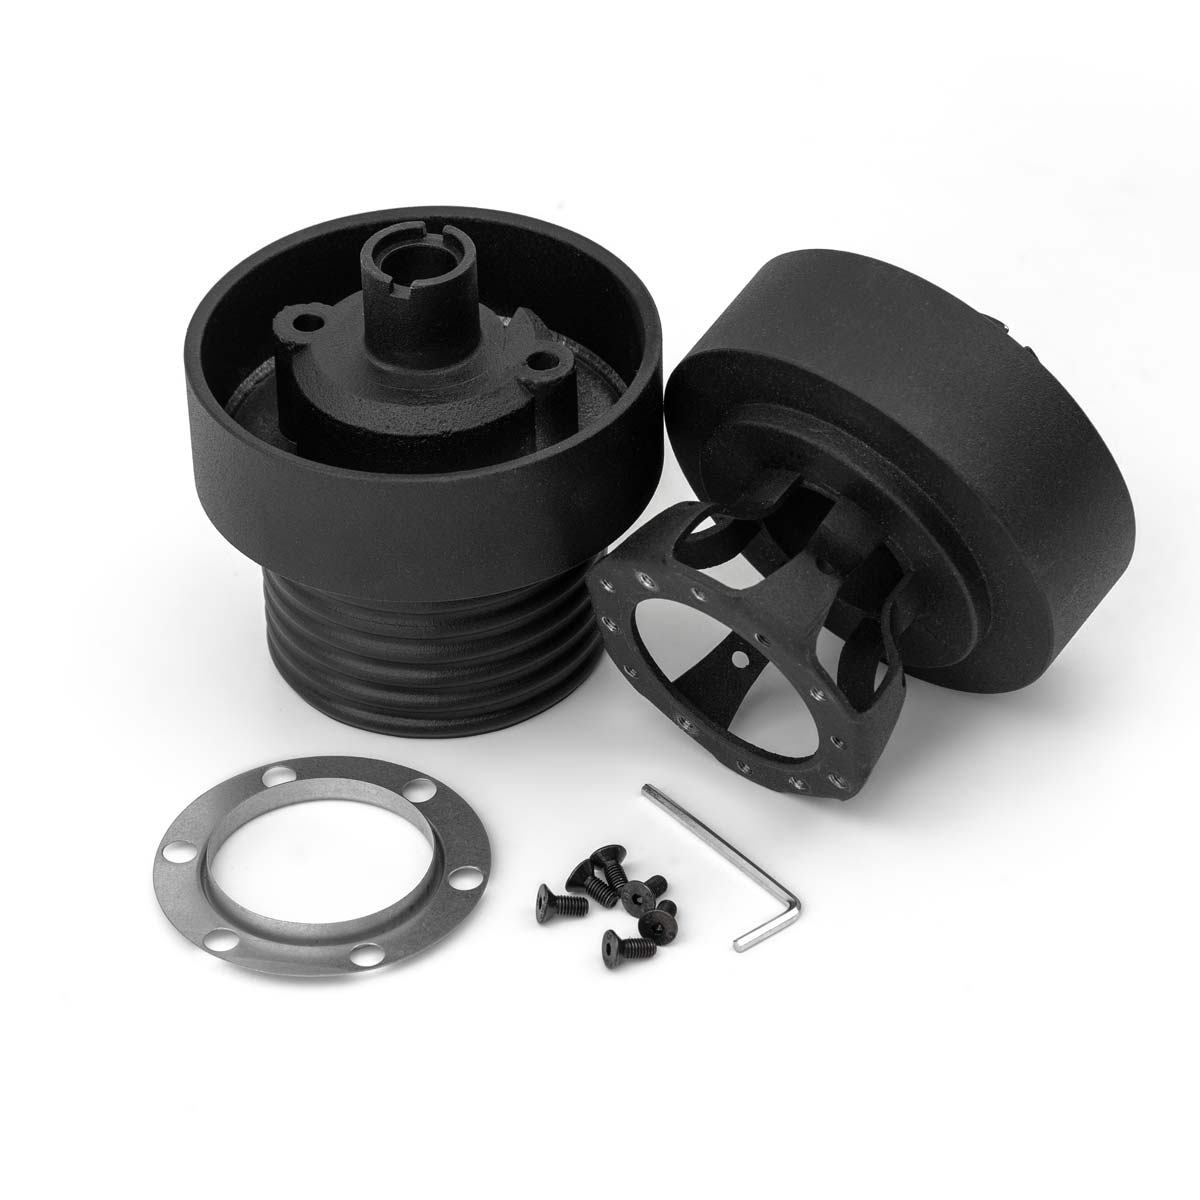 LUISI steering wheel hub Dodge Charger 1984-1987 (TÜV-compliant deformable / 6x74mm 6x70mm)